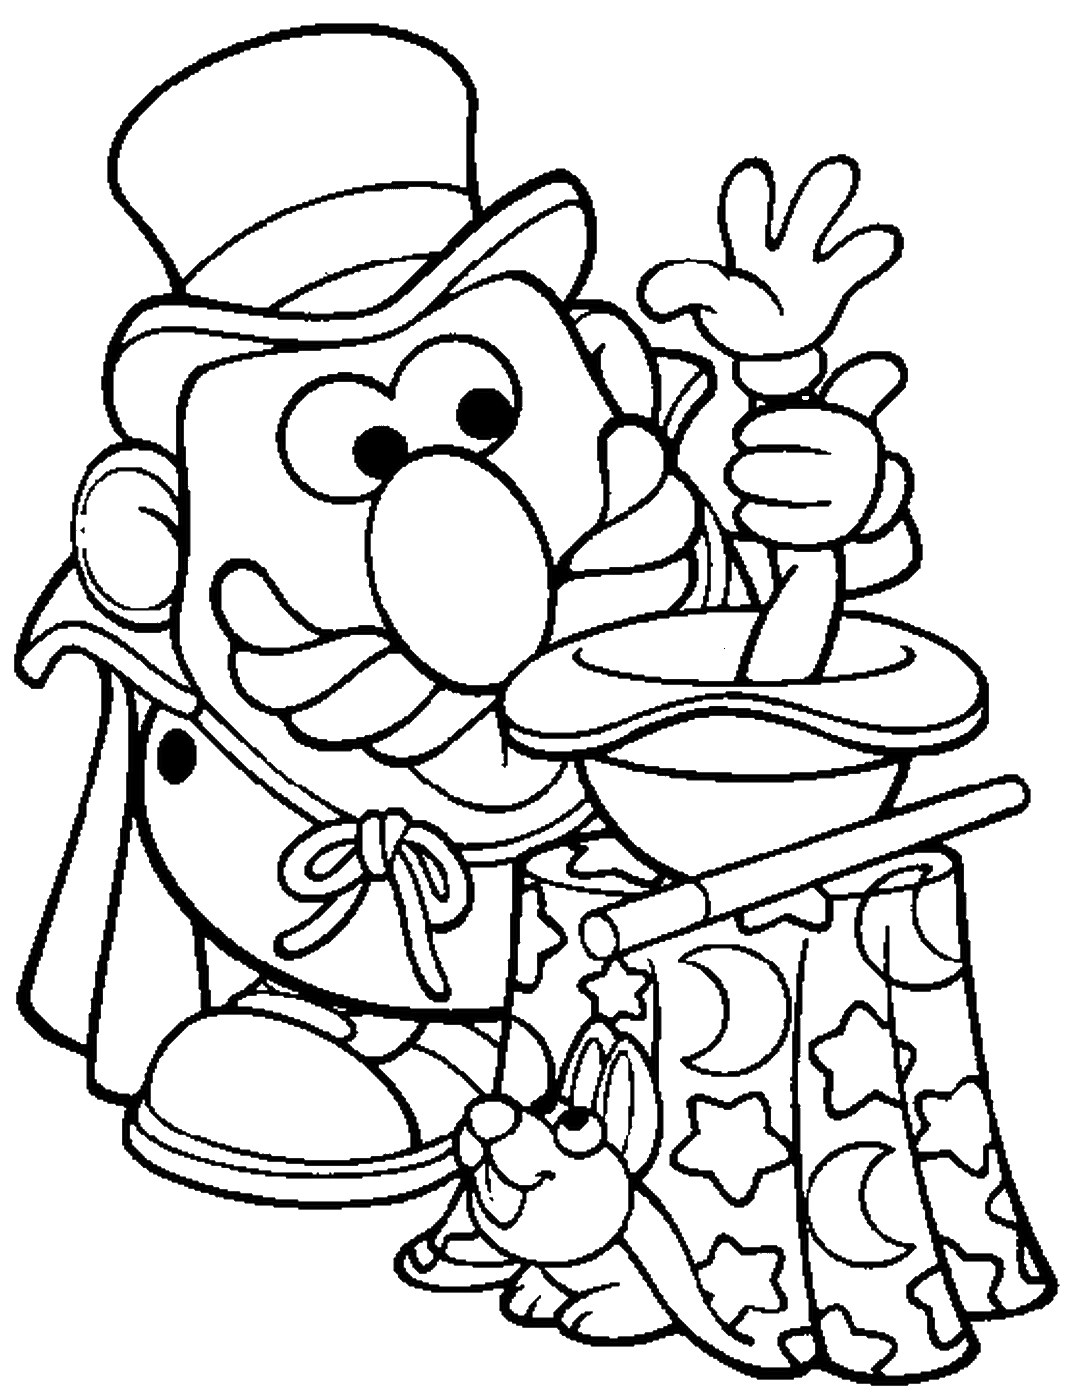 Magic Coloring Pages - Best Coloring Pages For Kids